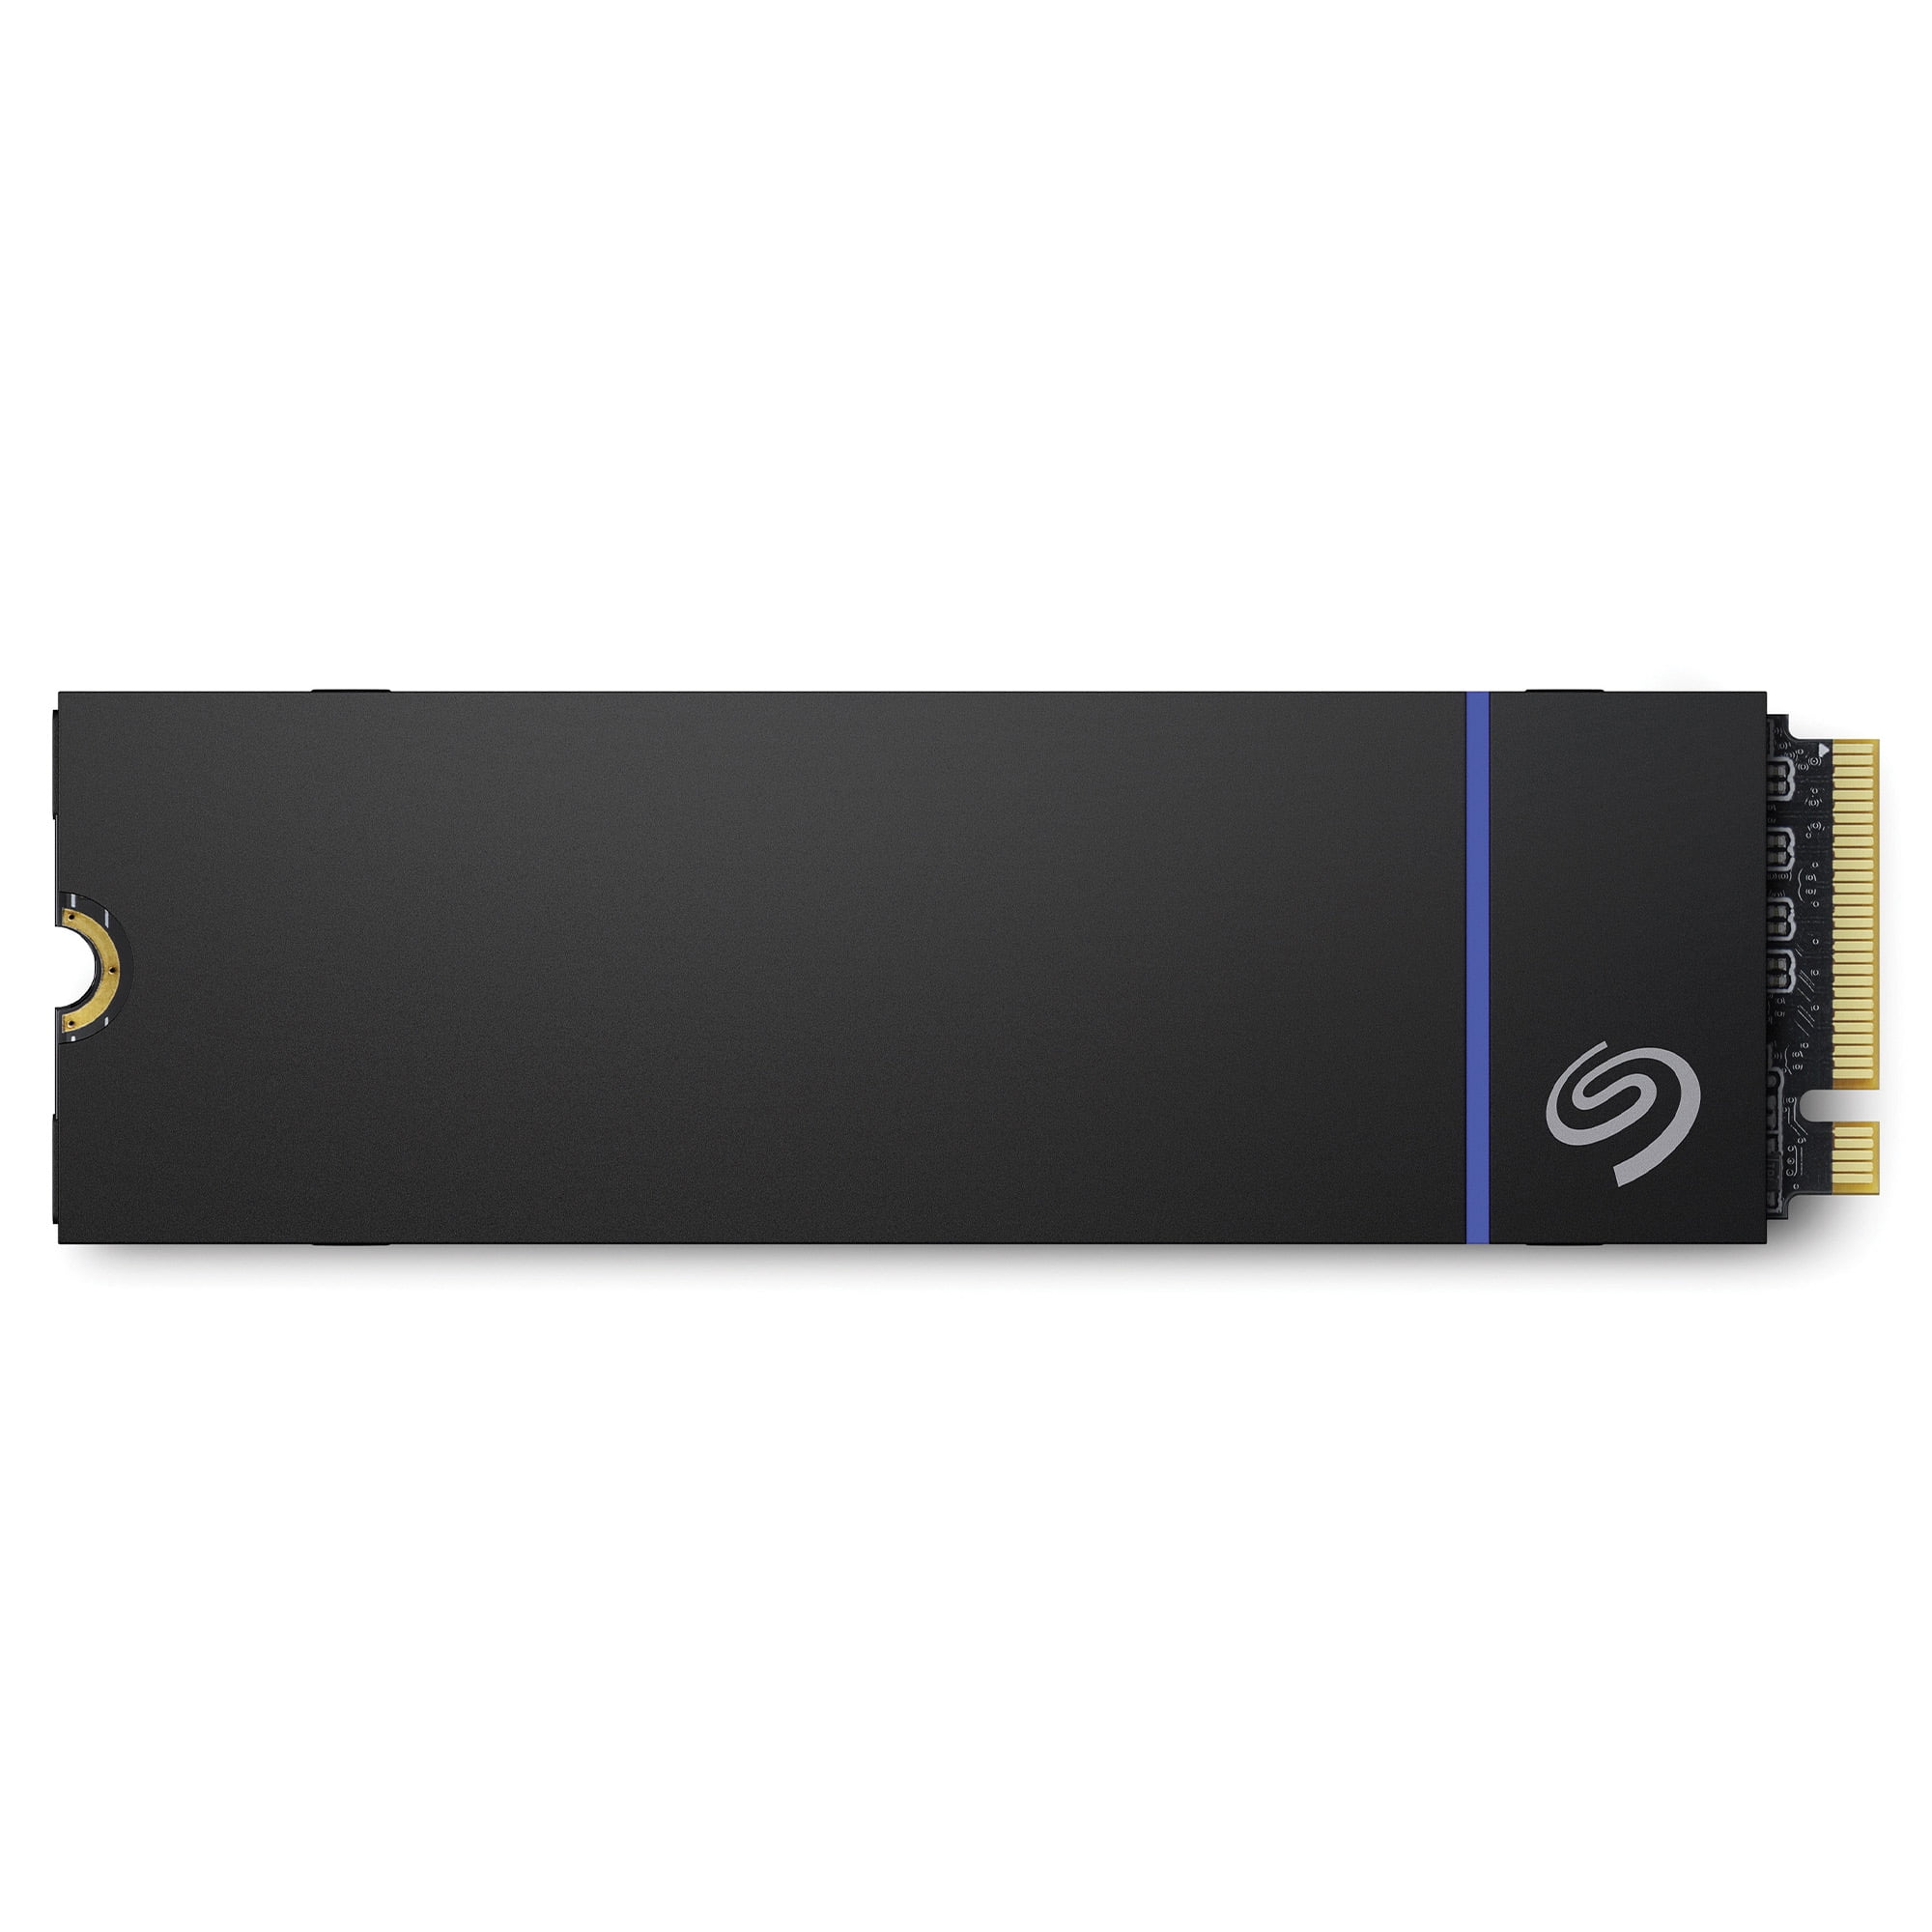 Seagate Game Drive M.2 1TB Internal SSD PCIe Gen 4 x4 NVMe with Heatsink  for PS5